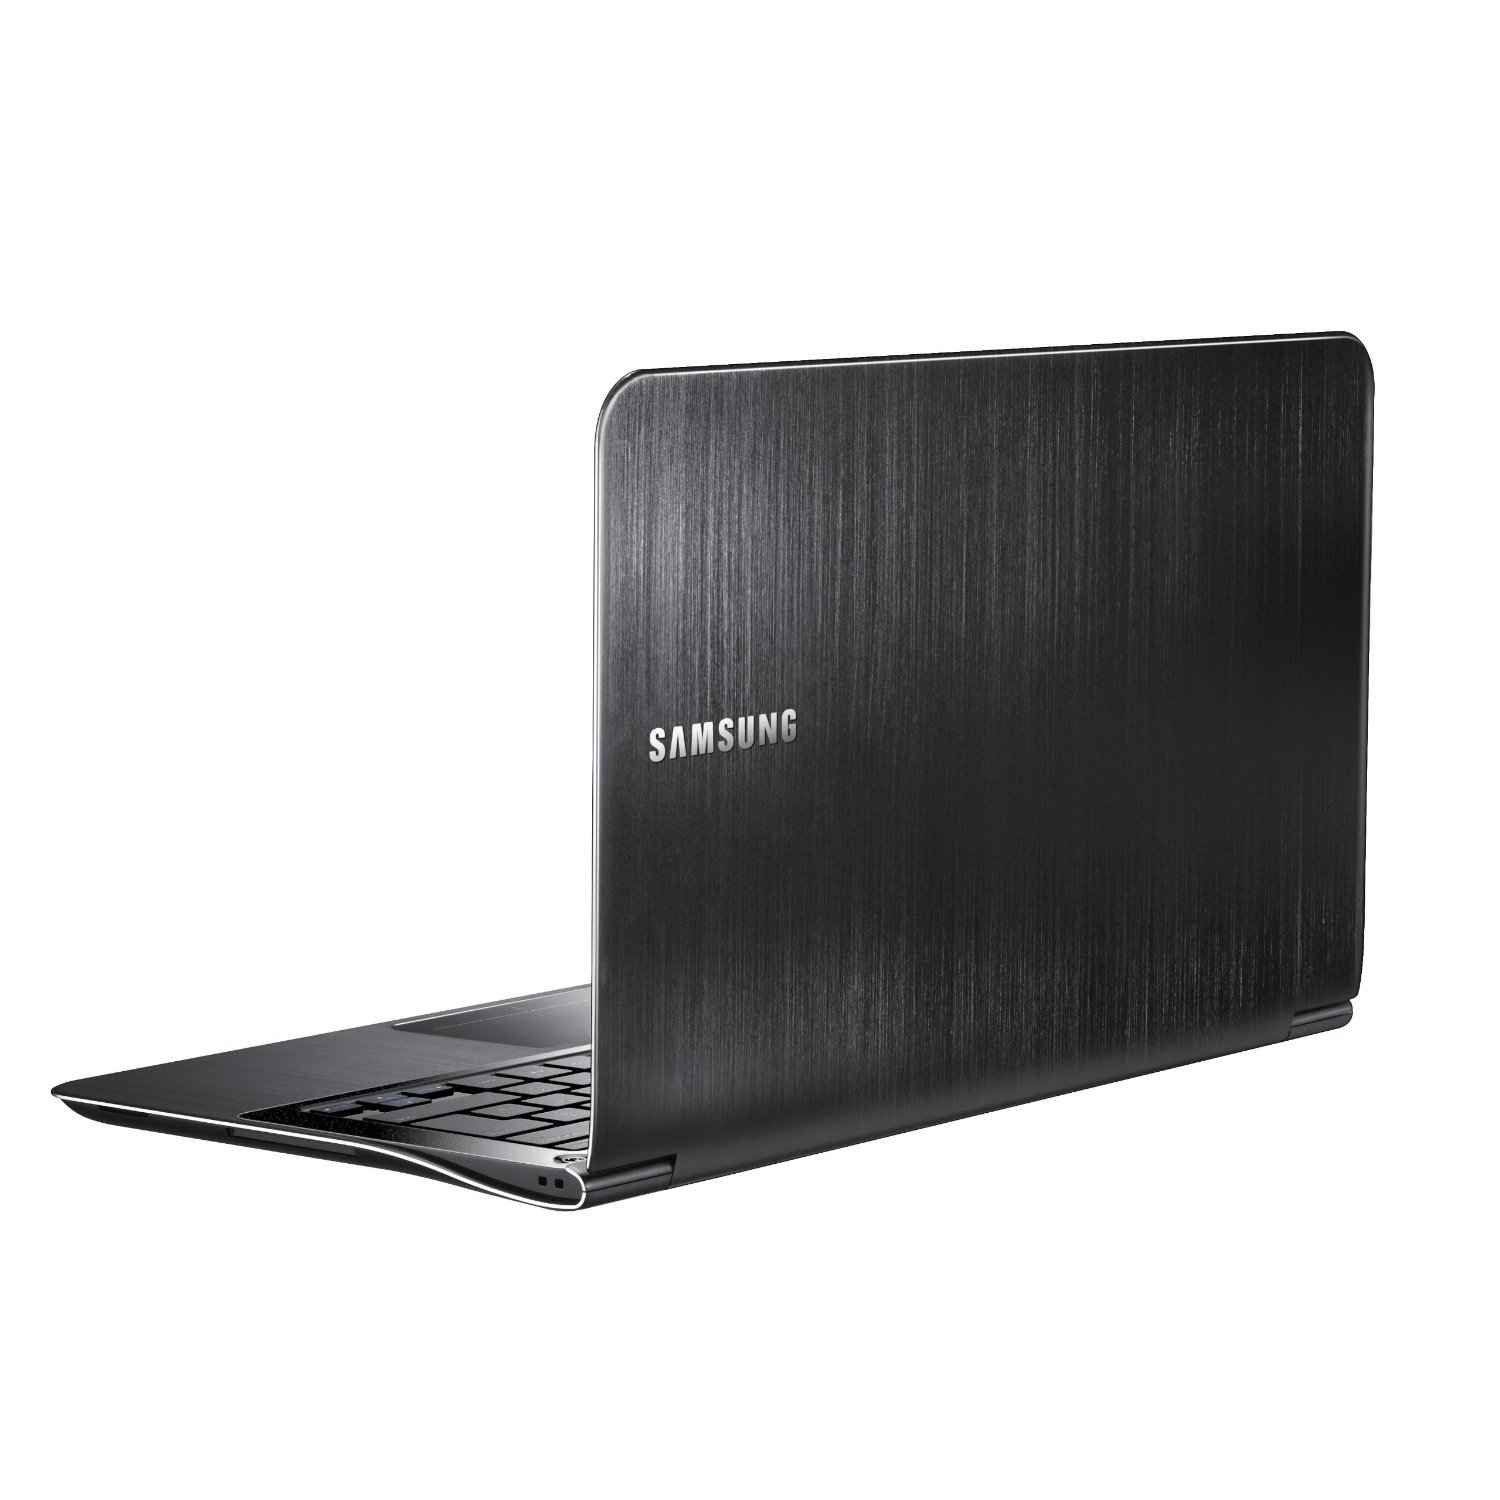 http://thetechjournal.com/wp-content/uploads/images/1108/1312961318-samsung-series-9-np900x3aa02us-133inch-laptop-7.jpg